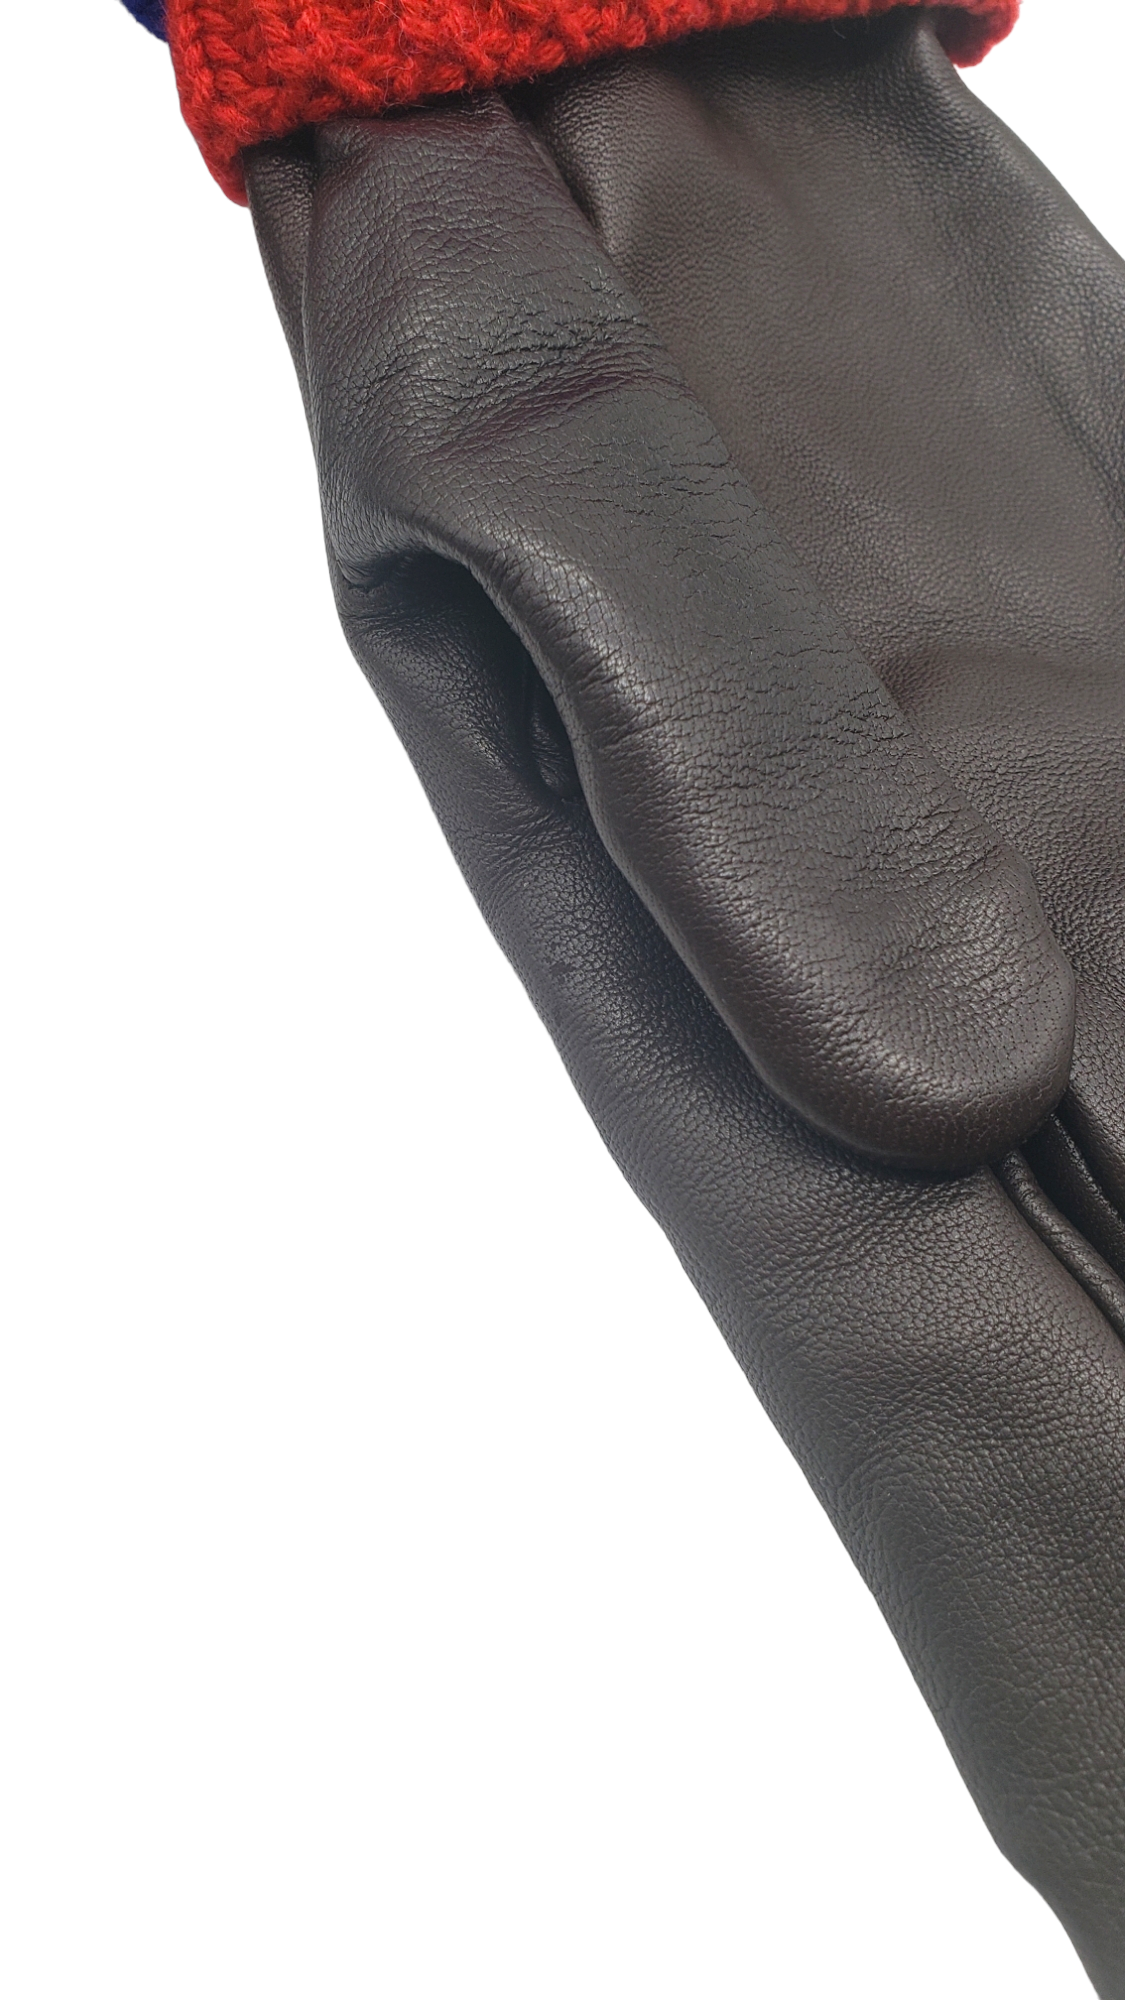 Gucci Brown Leather Size Medium Gloves